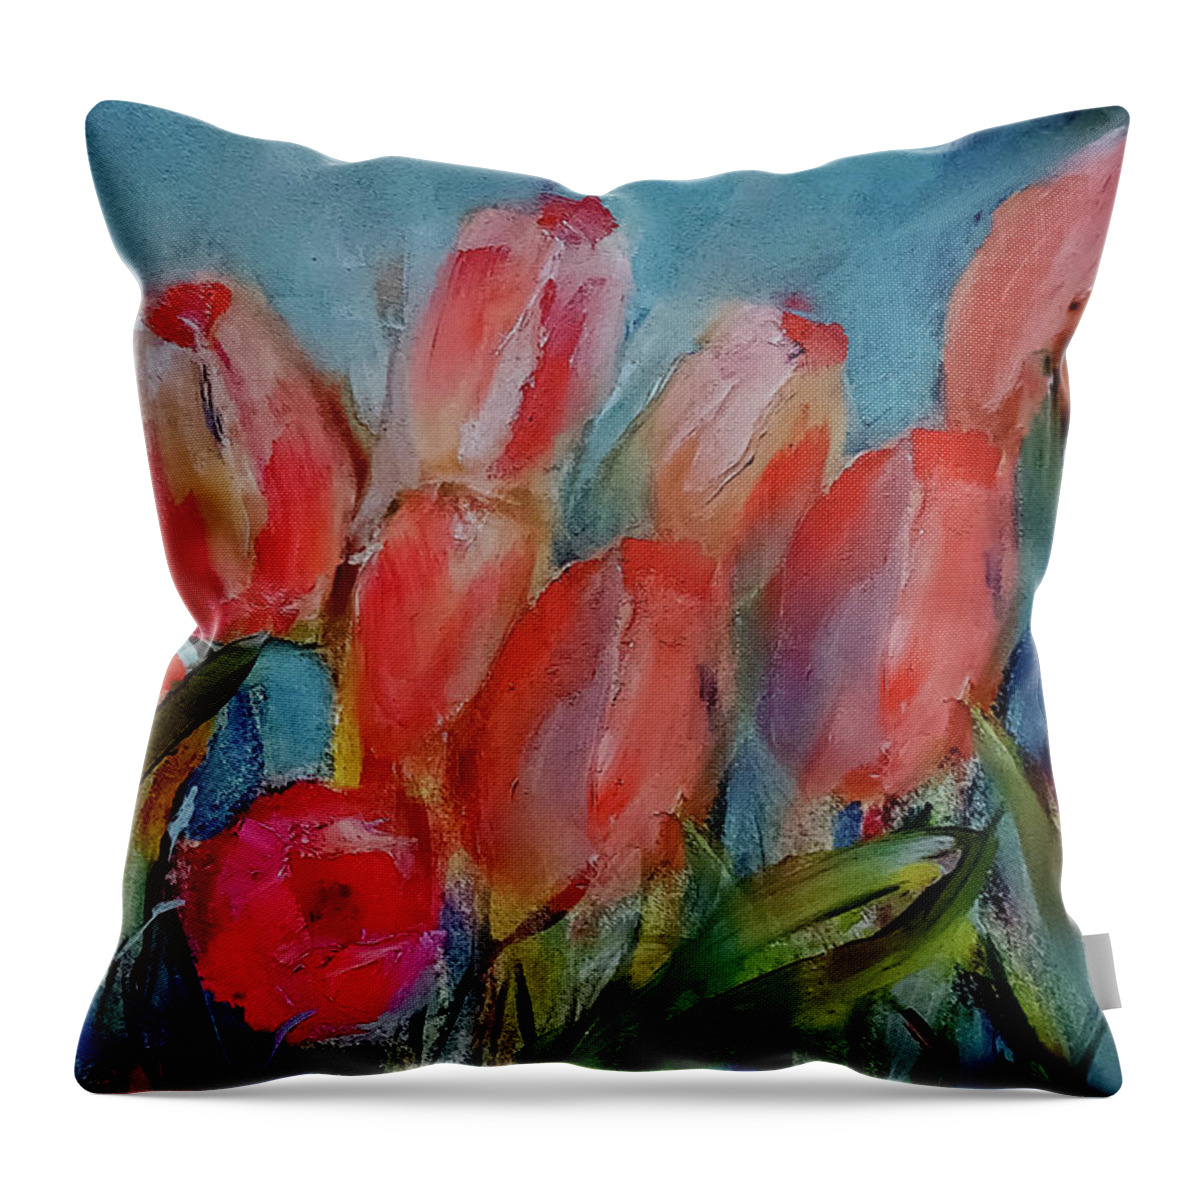 Blooms Throw Pillow featuring the painting They Will Bloom Soon by Lisa Kaiser